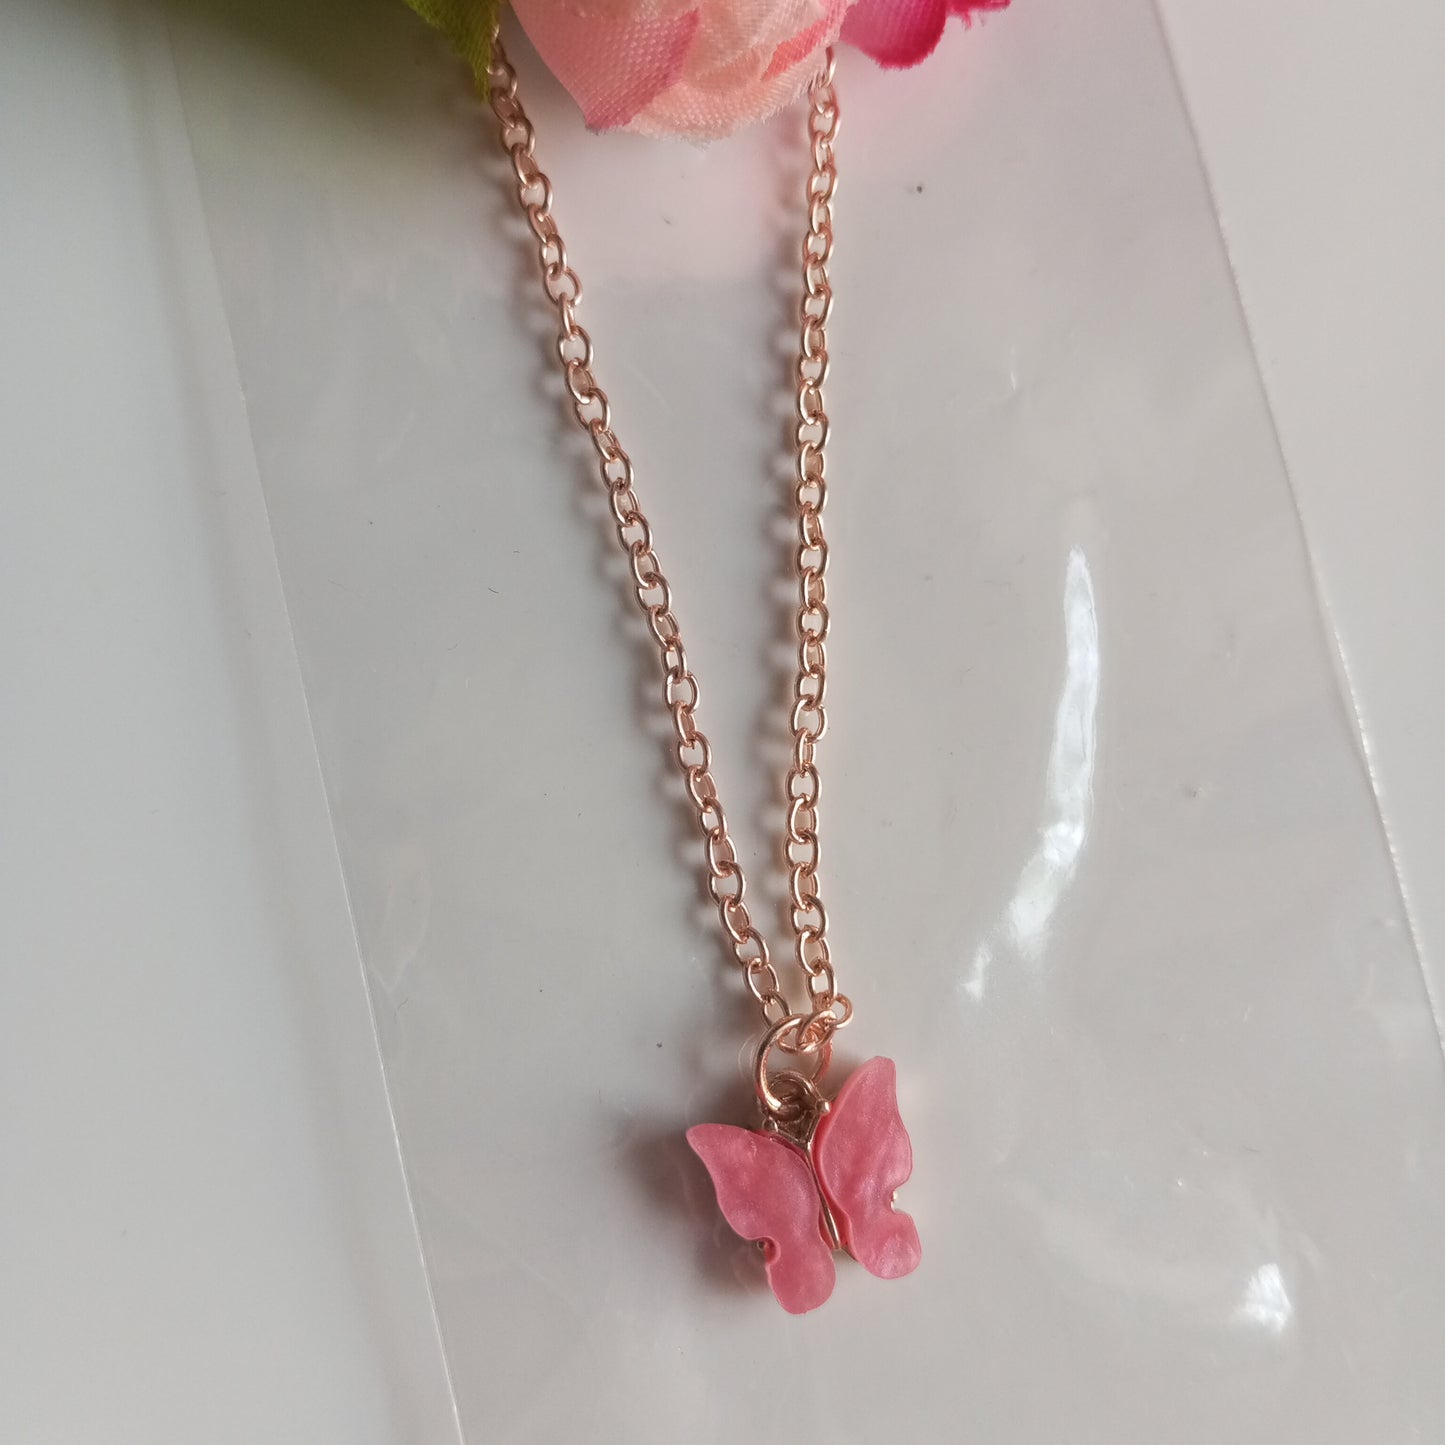 Chain with Pendant- Pink Butterfly